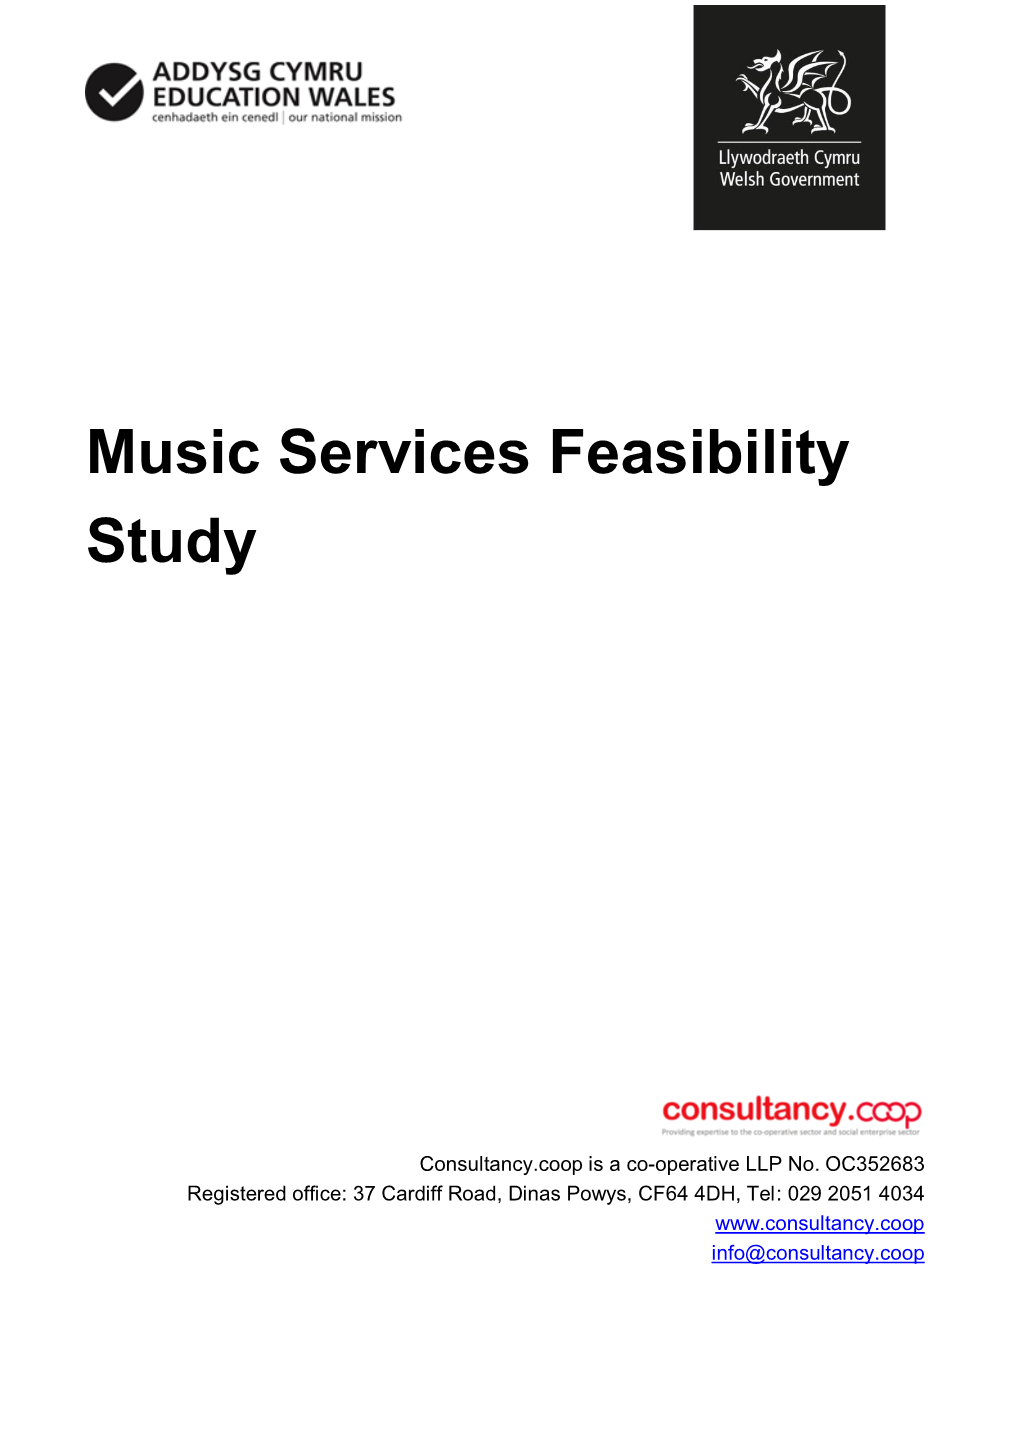 Music Services Feasibility Study